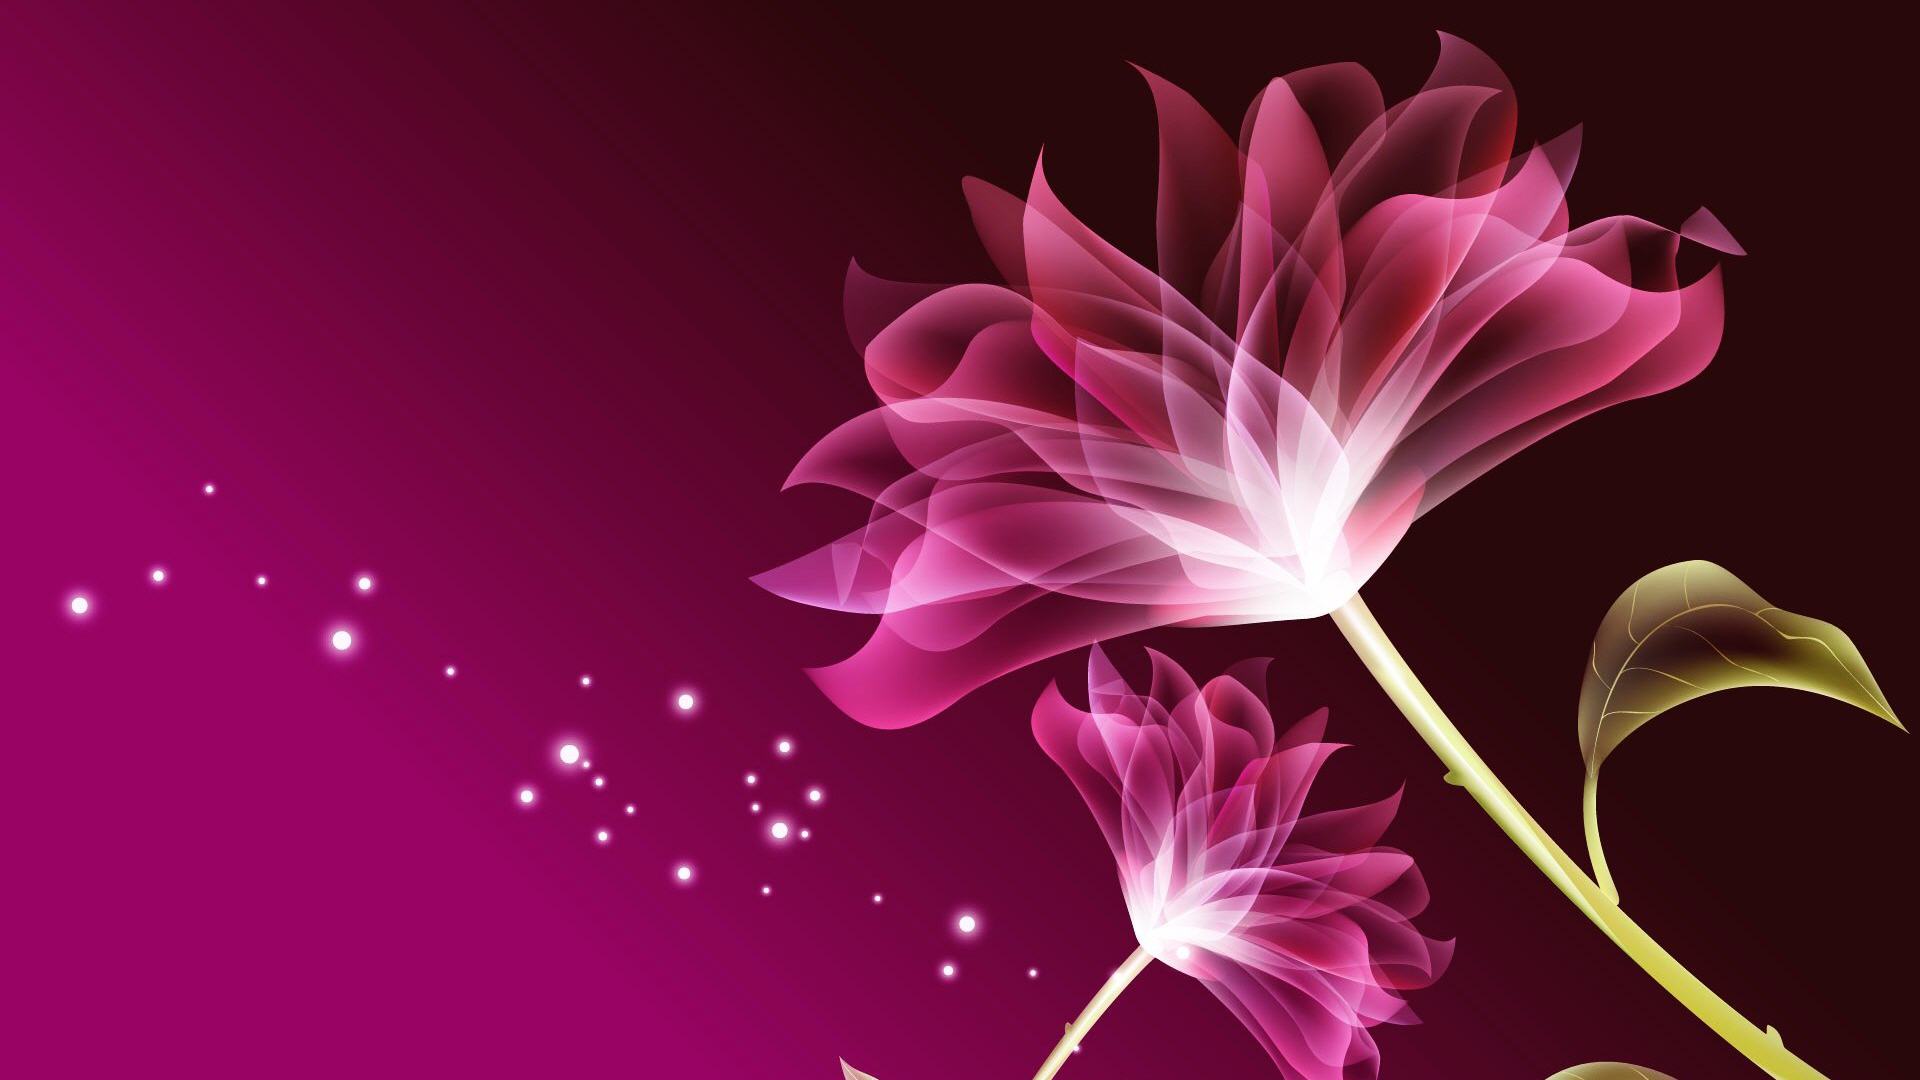 45 Hd Beautiful Wallpapers Backgrounds For Free Download